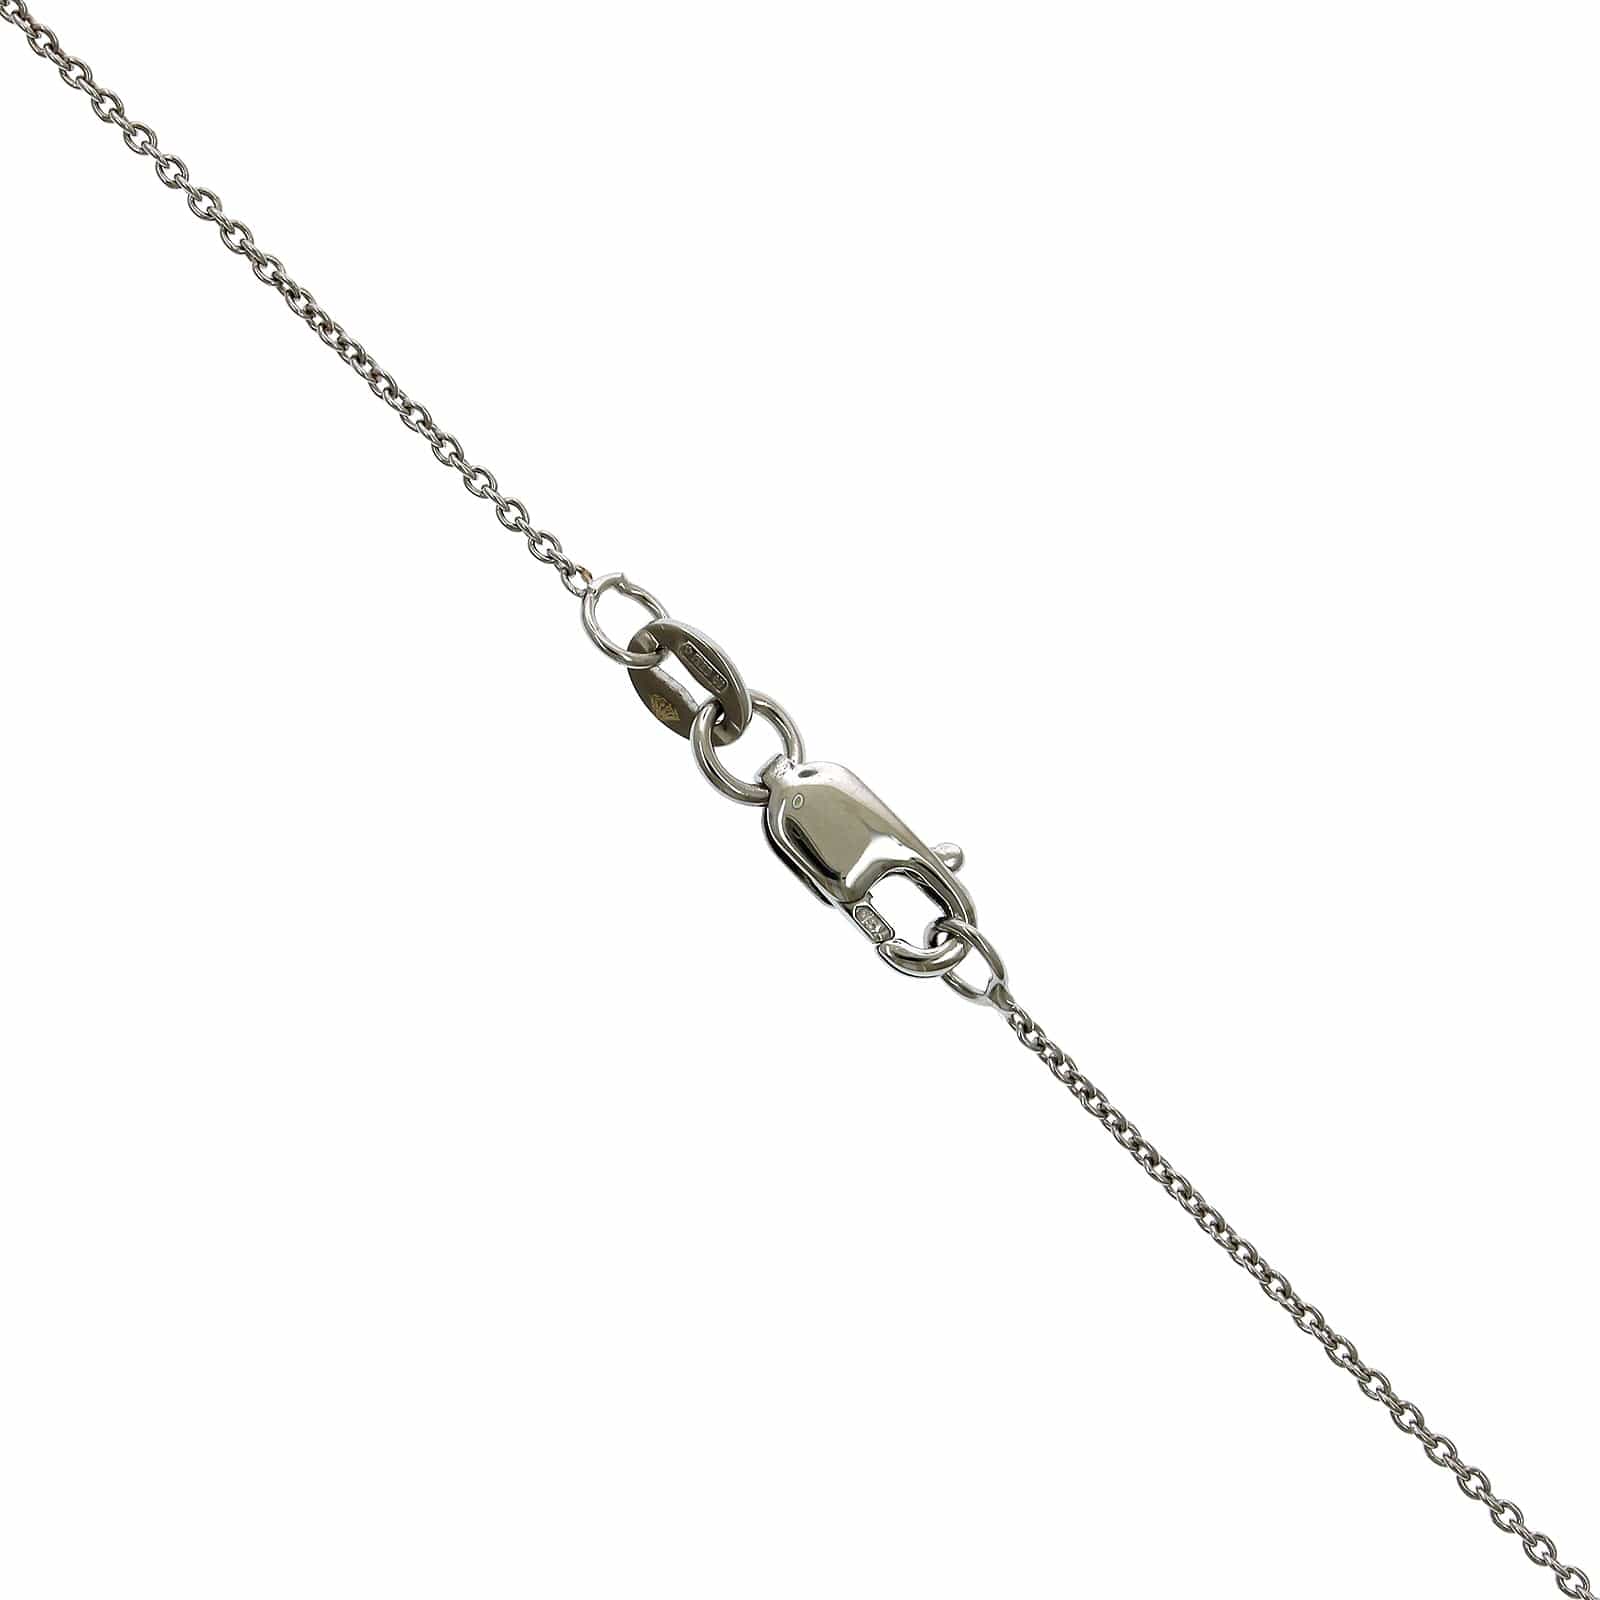 Roberto Coin 18K White Gold "F" Initial Diamond Necklace